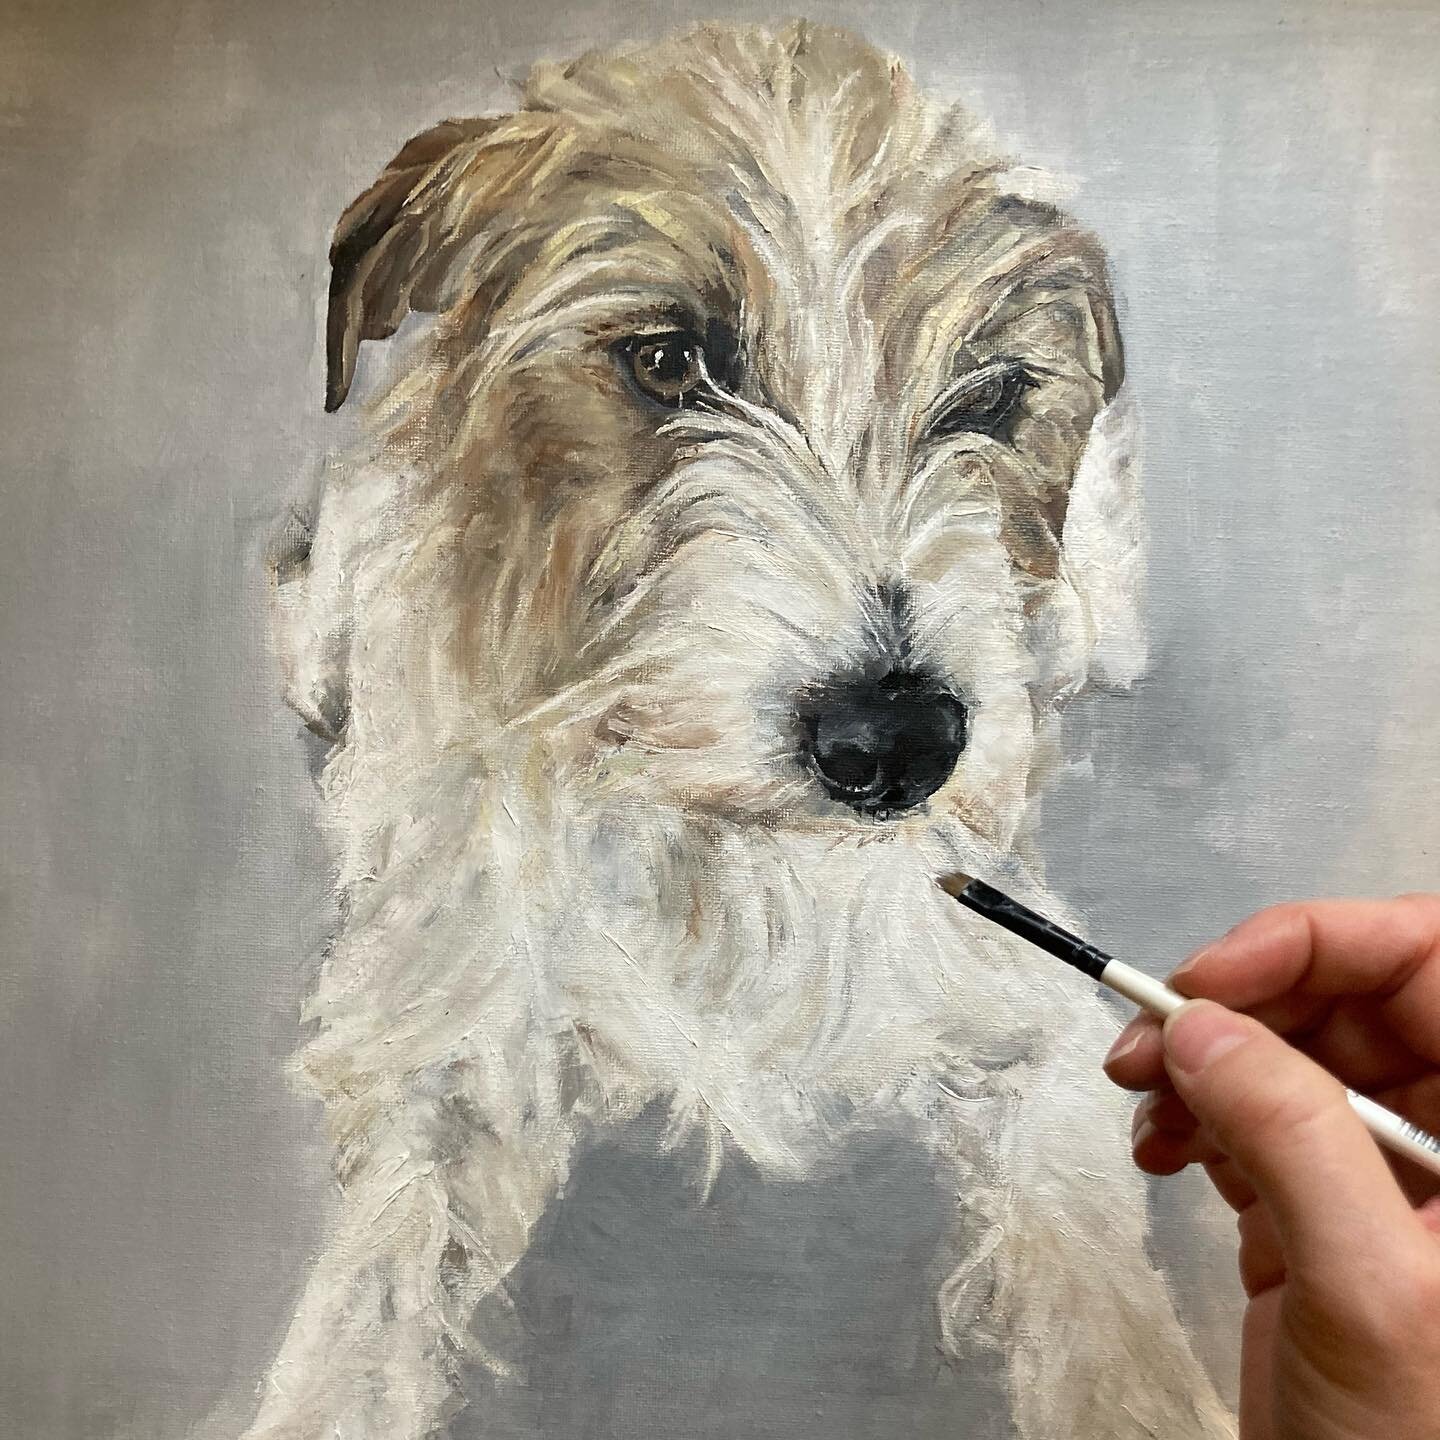 Back to the calmness of the studio! I have snuck in an hour between feeds and nappy / outfit changes to try and finish this commission of gorgeous Maggie&hellip; 

#commission #petportrait #animalart #painting #artist #artistsoninstagram #oilpainting